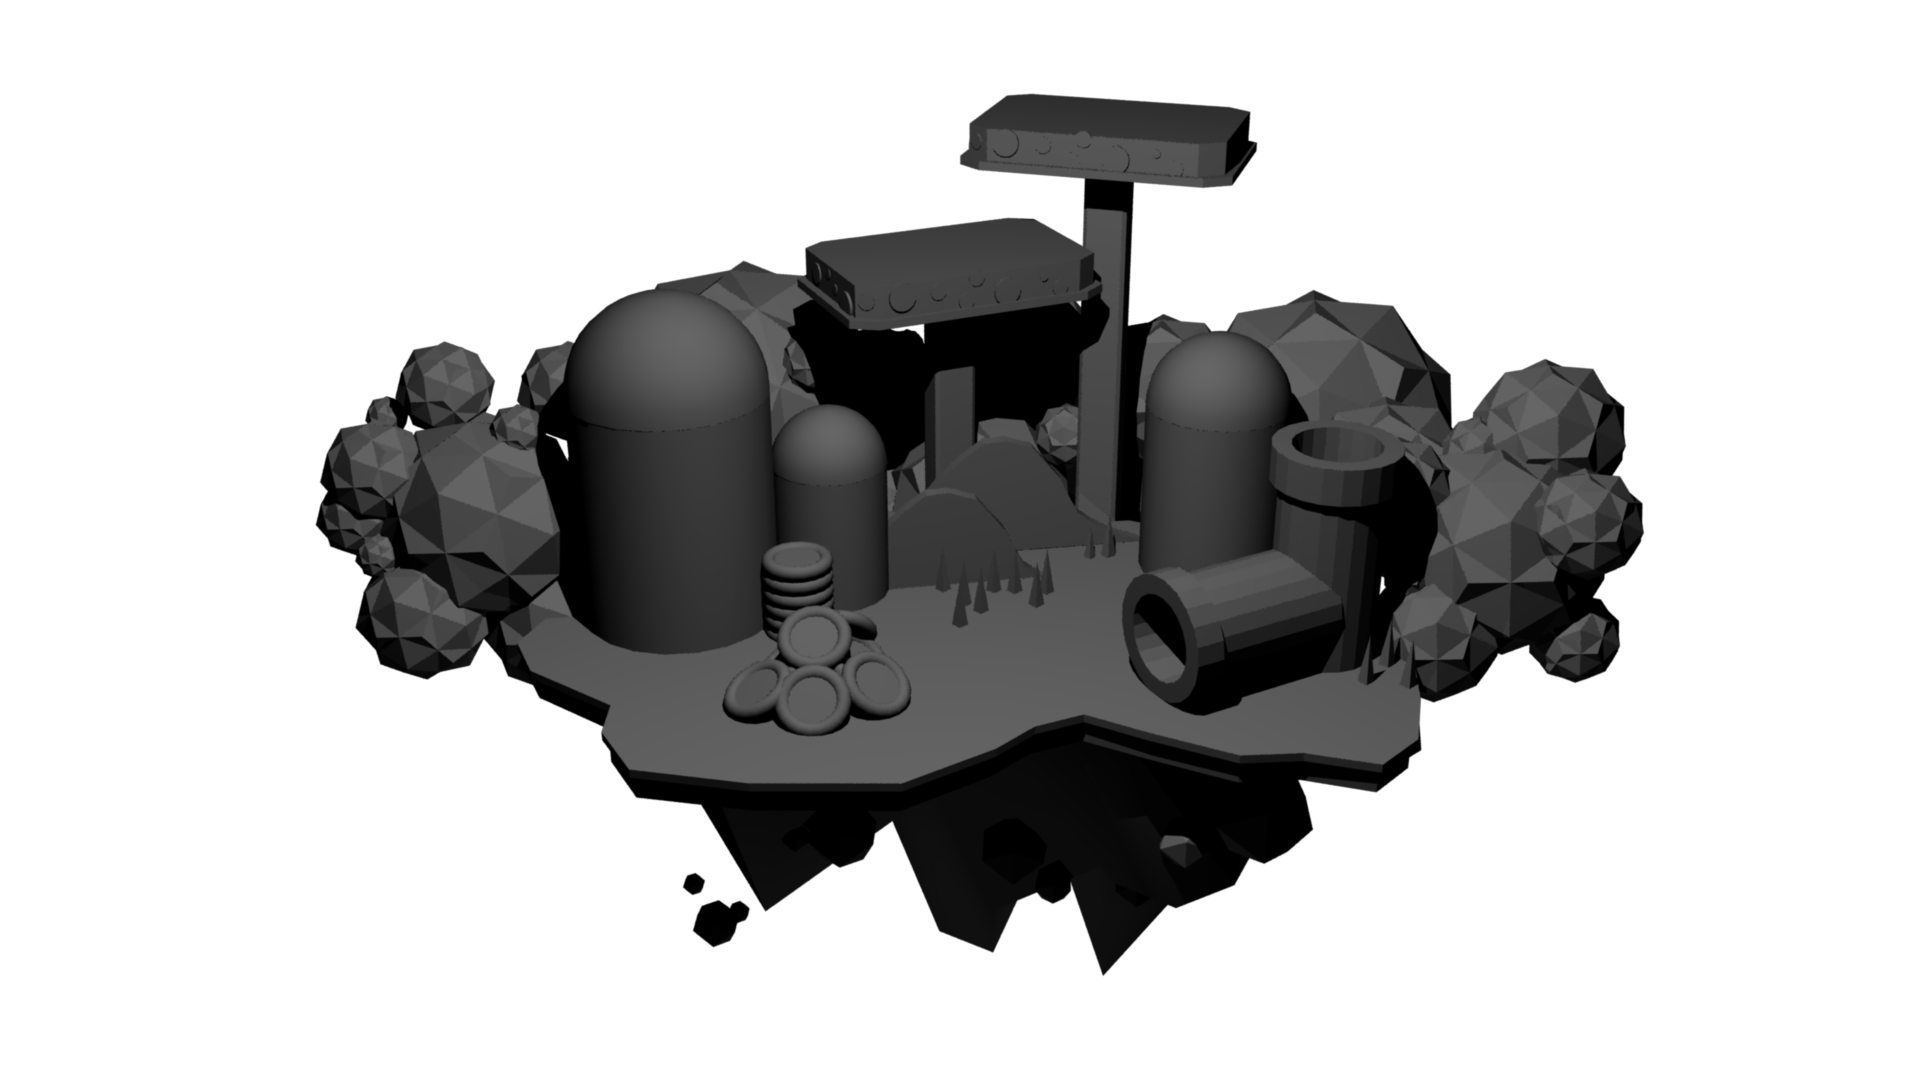 The light layer of Jameson's low-poly 3D model island